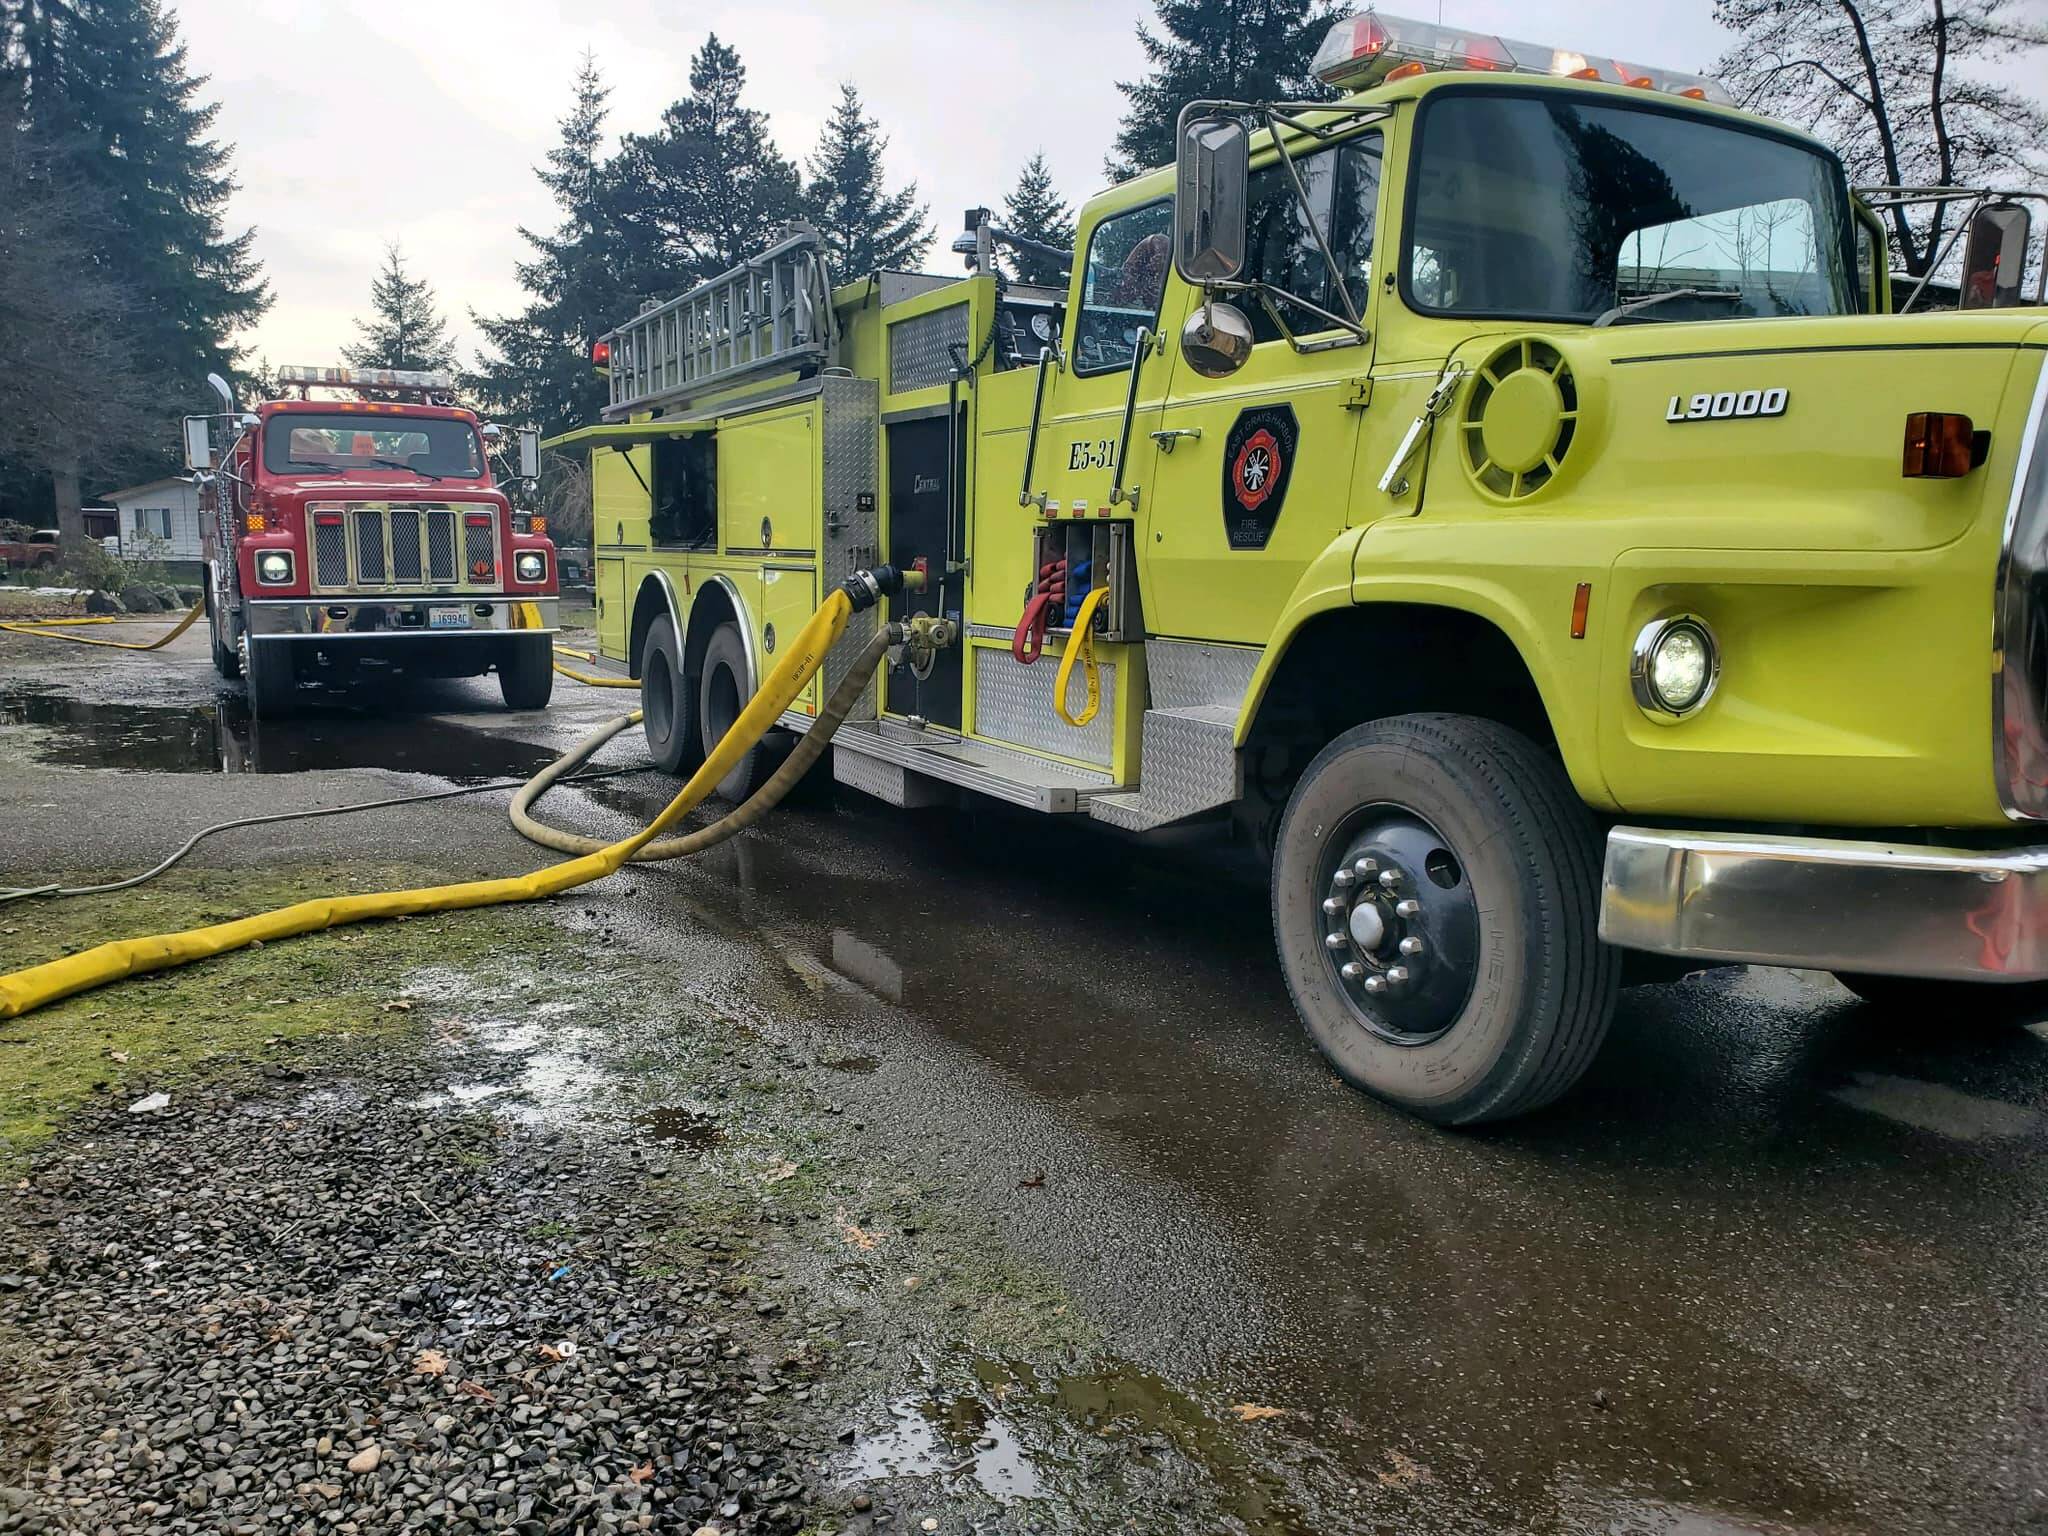 Multiple departments responded to a major fire at a residence that spread to a tree and destroyed a second residence south of Elma on Feb. 25. (Courtesy photo / East Grays Harbor Fire and Rescue)